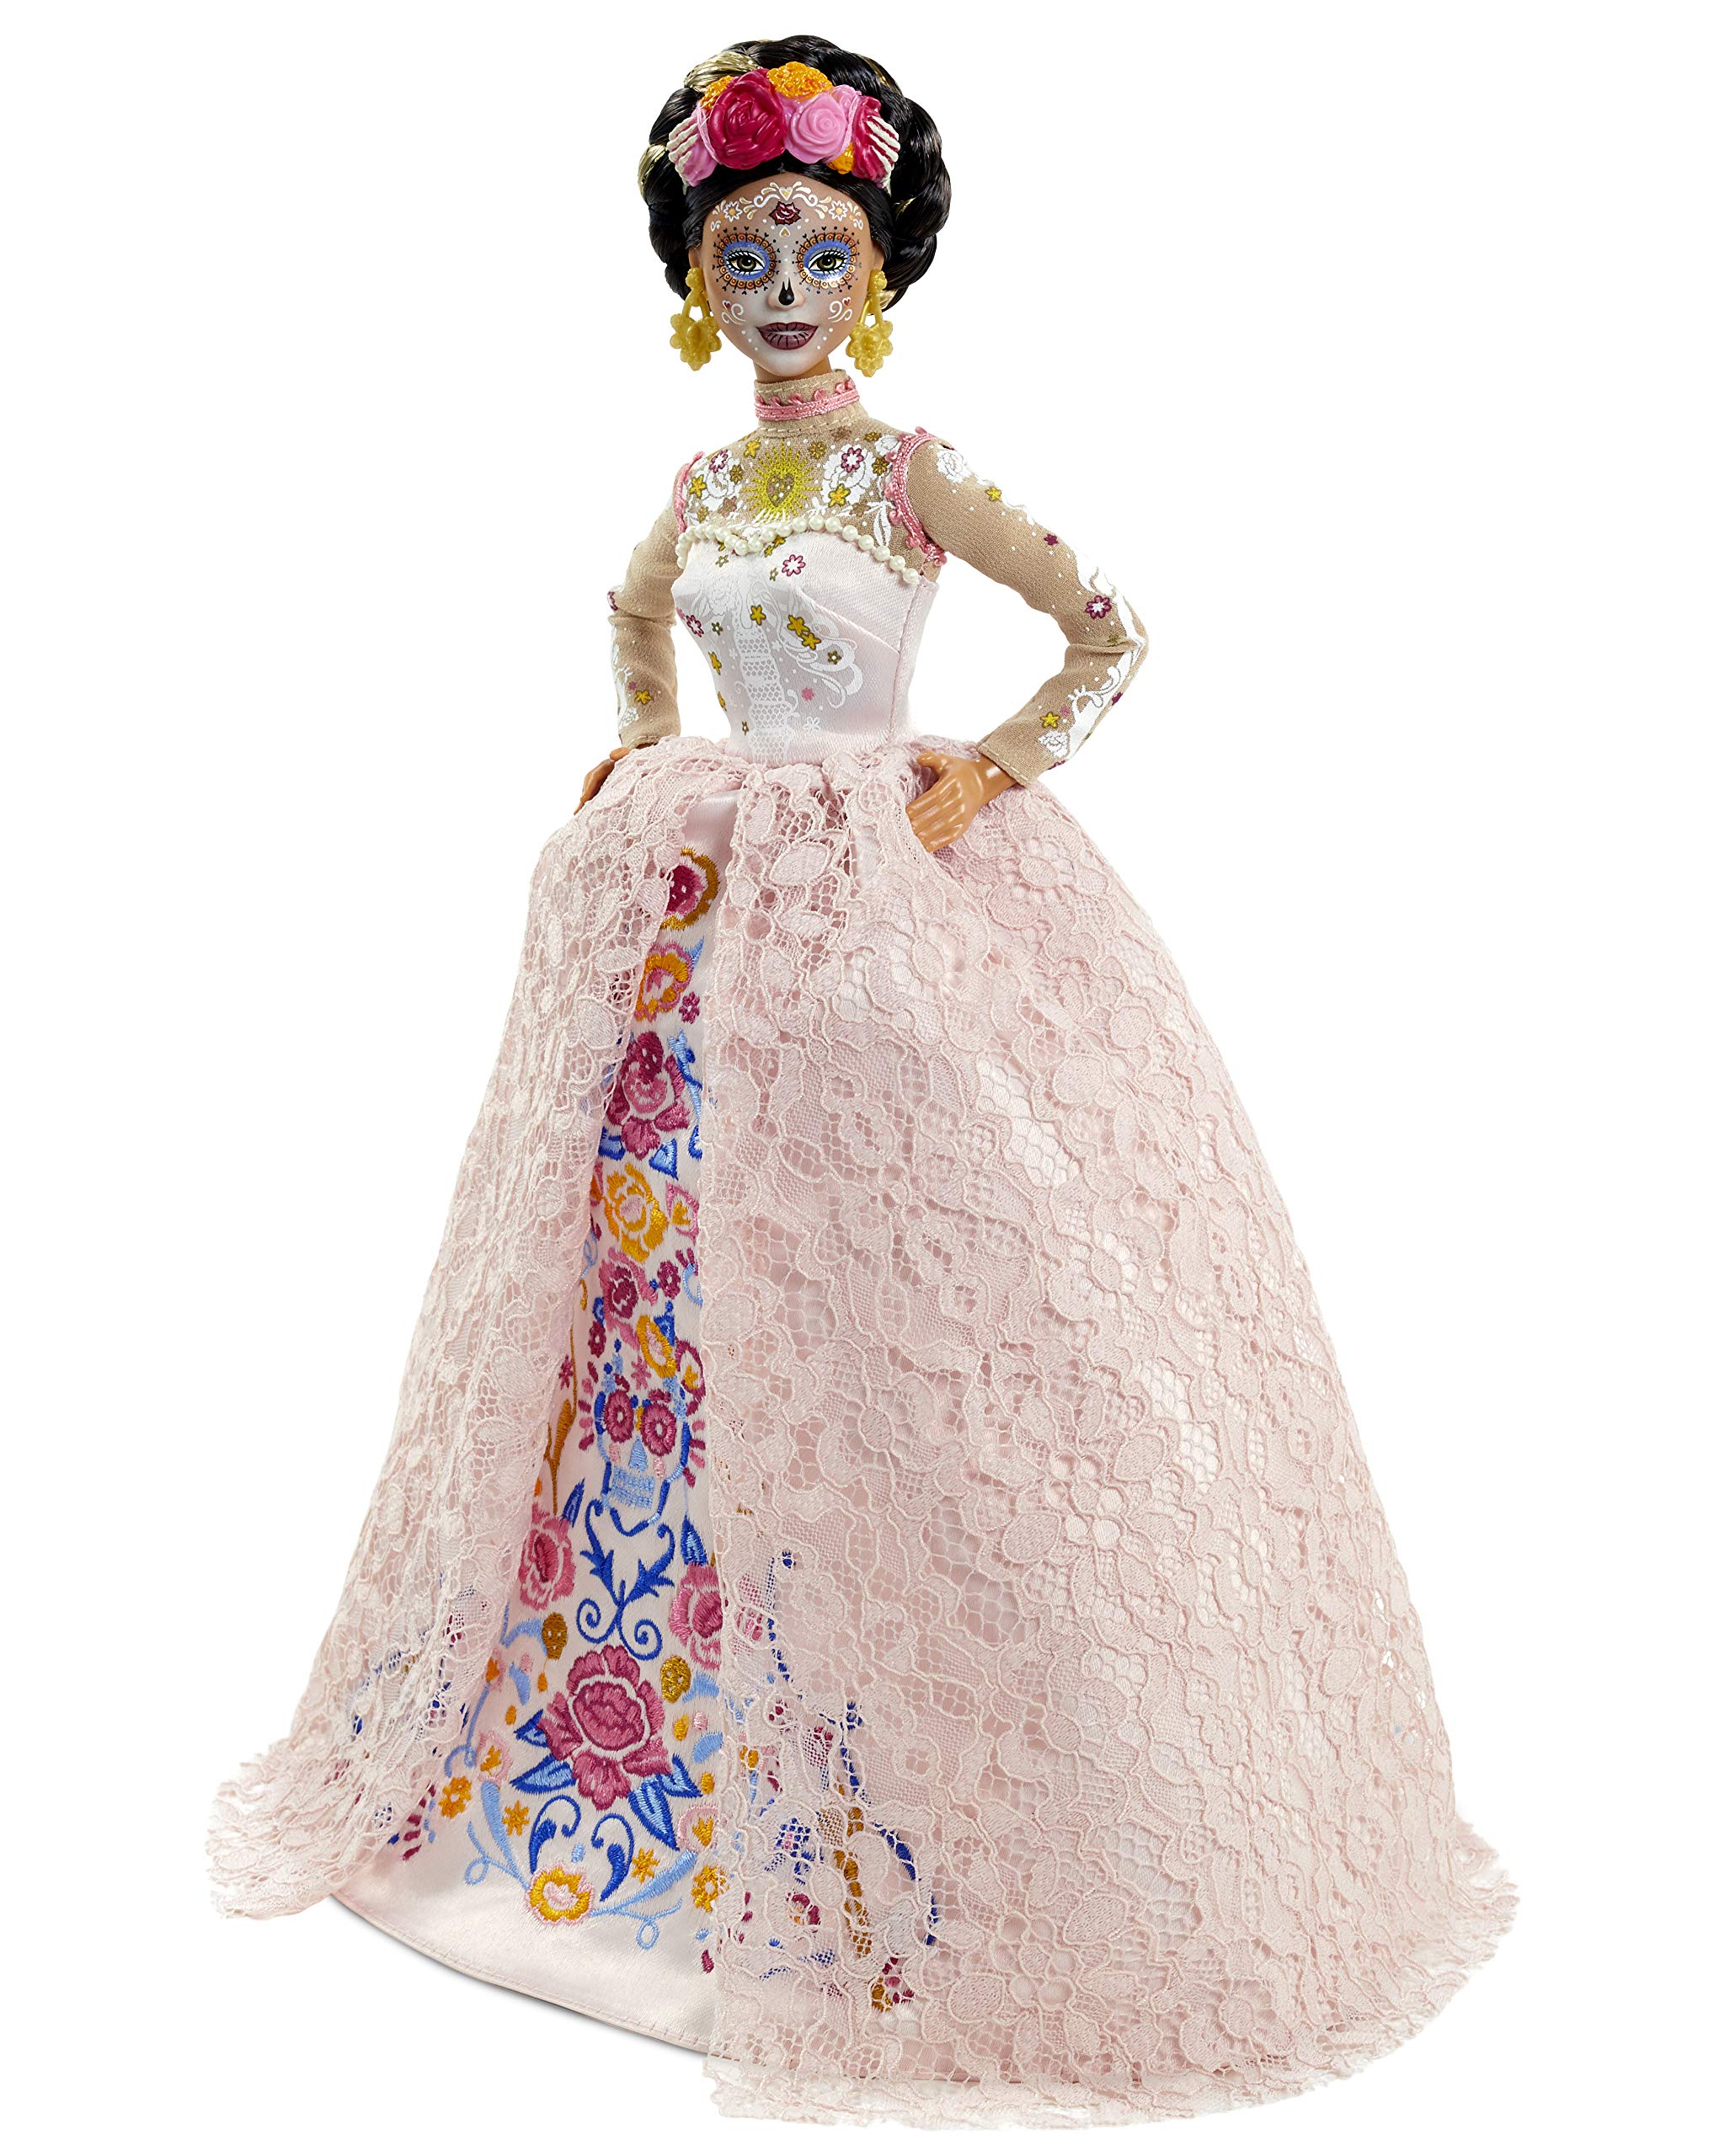 Barbie Signature Dia De Muertos 2020 Doll (12-in Brunette) in Embroidered Lace Dress and Flower Crown, with Certificate of Authenticity